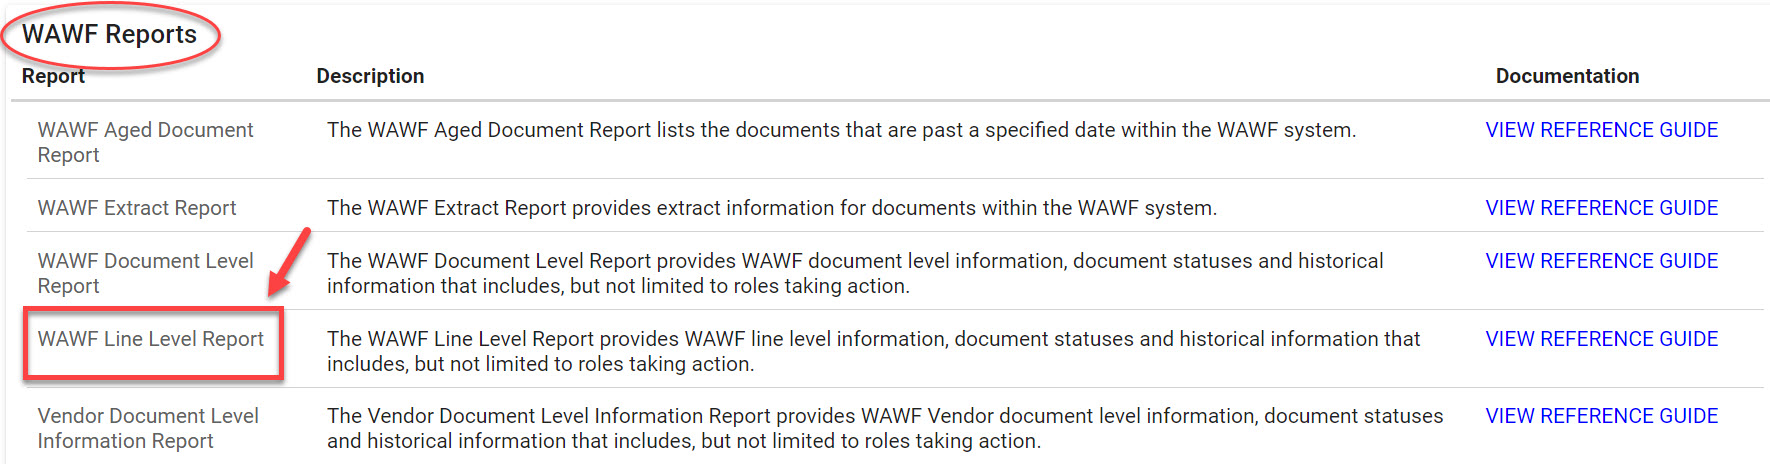 The image provides a preview of the WAWF Line Level Report Exmaple Document Type.